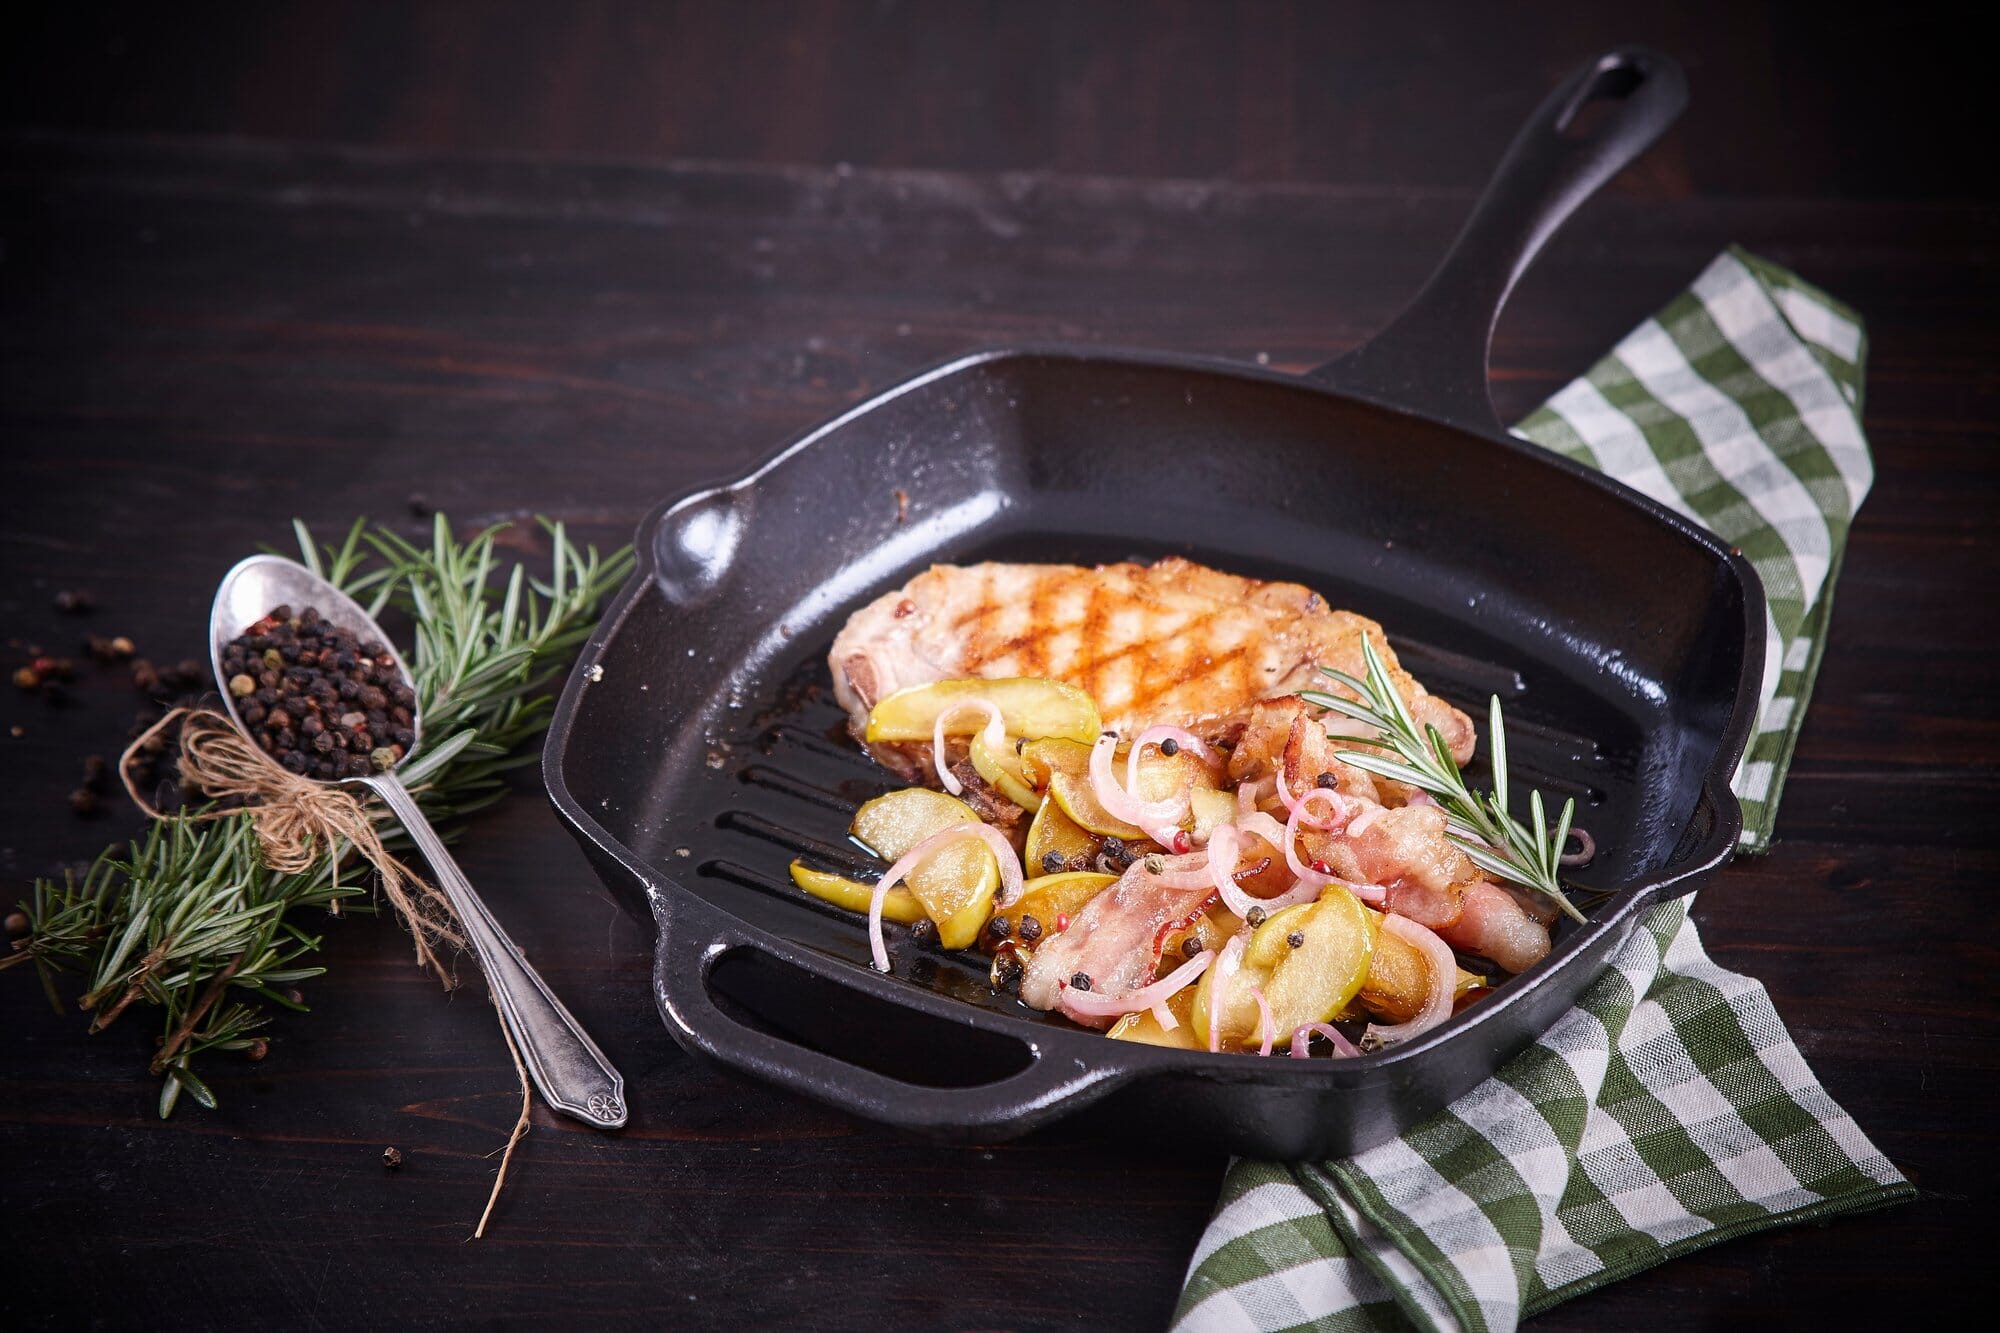 Giant Cast Iron Seashell Pan - Grill and Serve Up All Types of Seafood